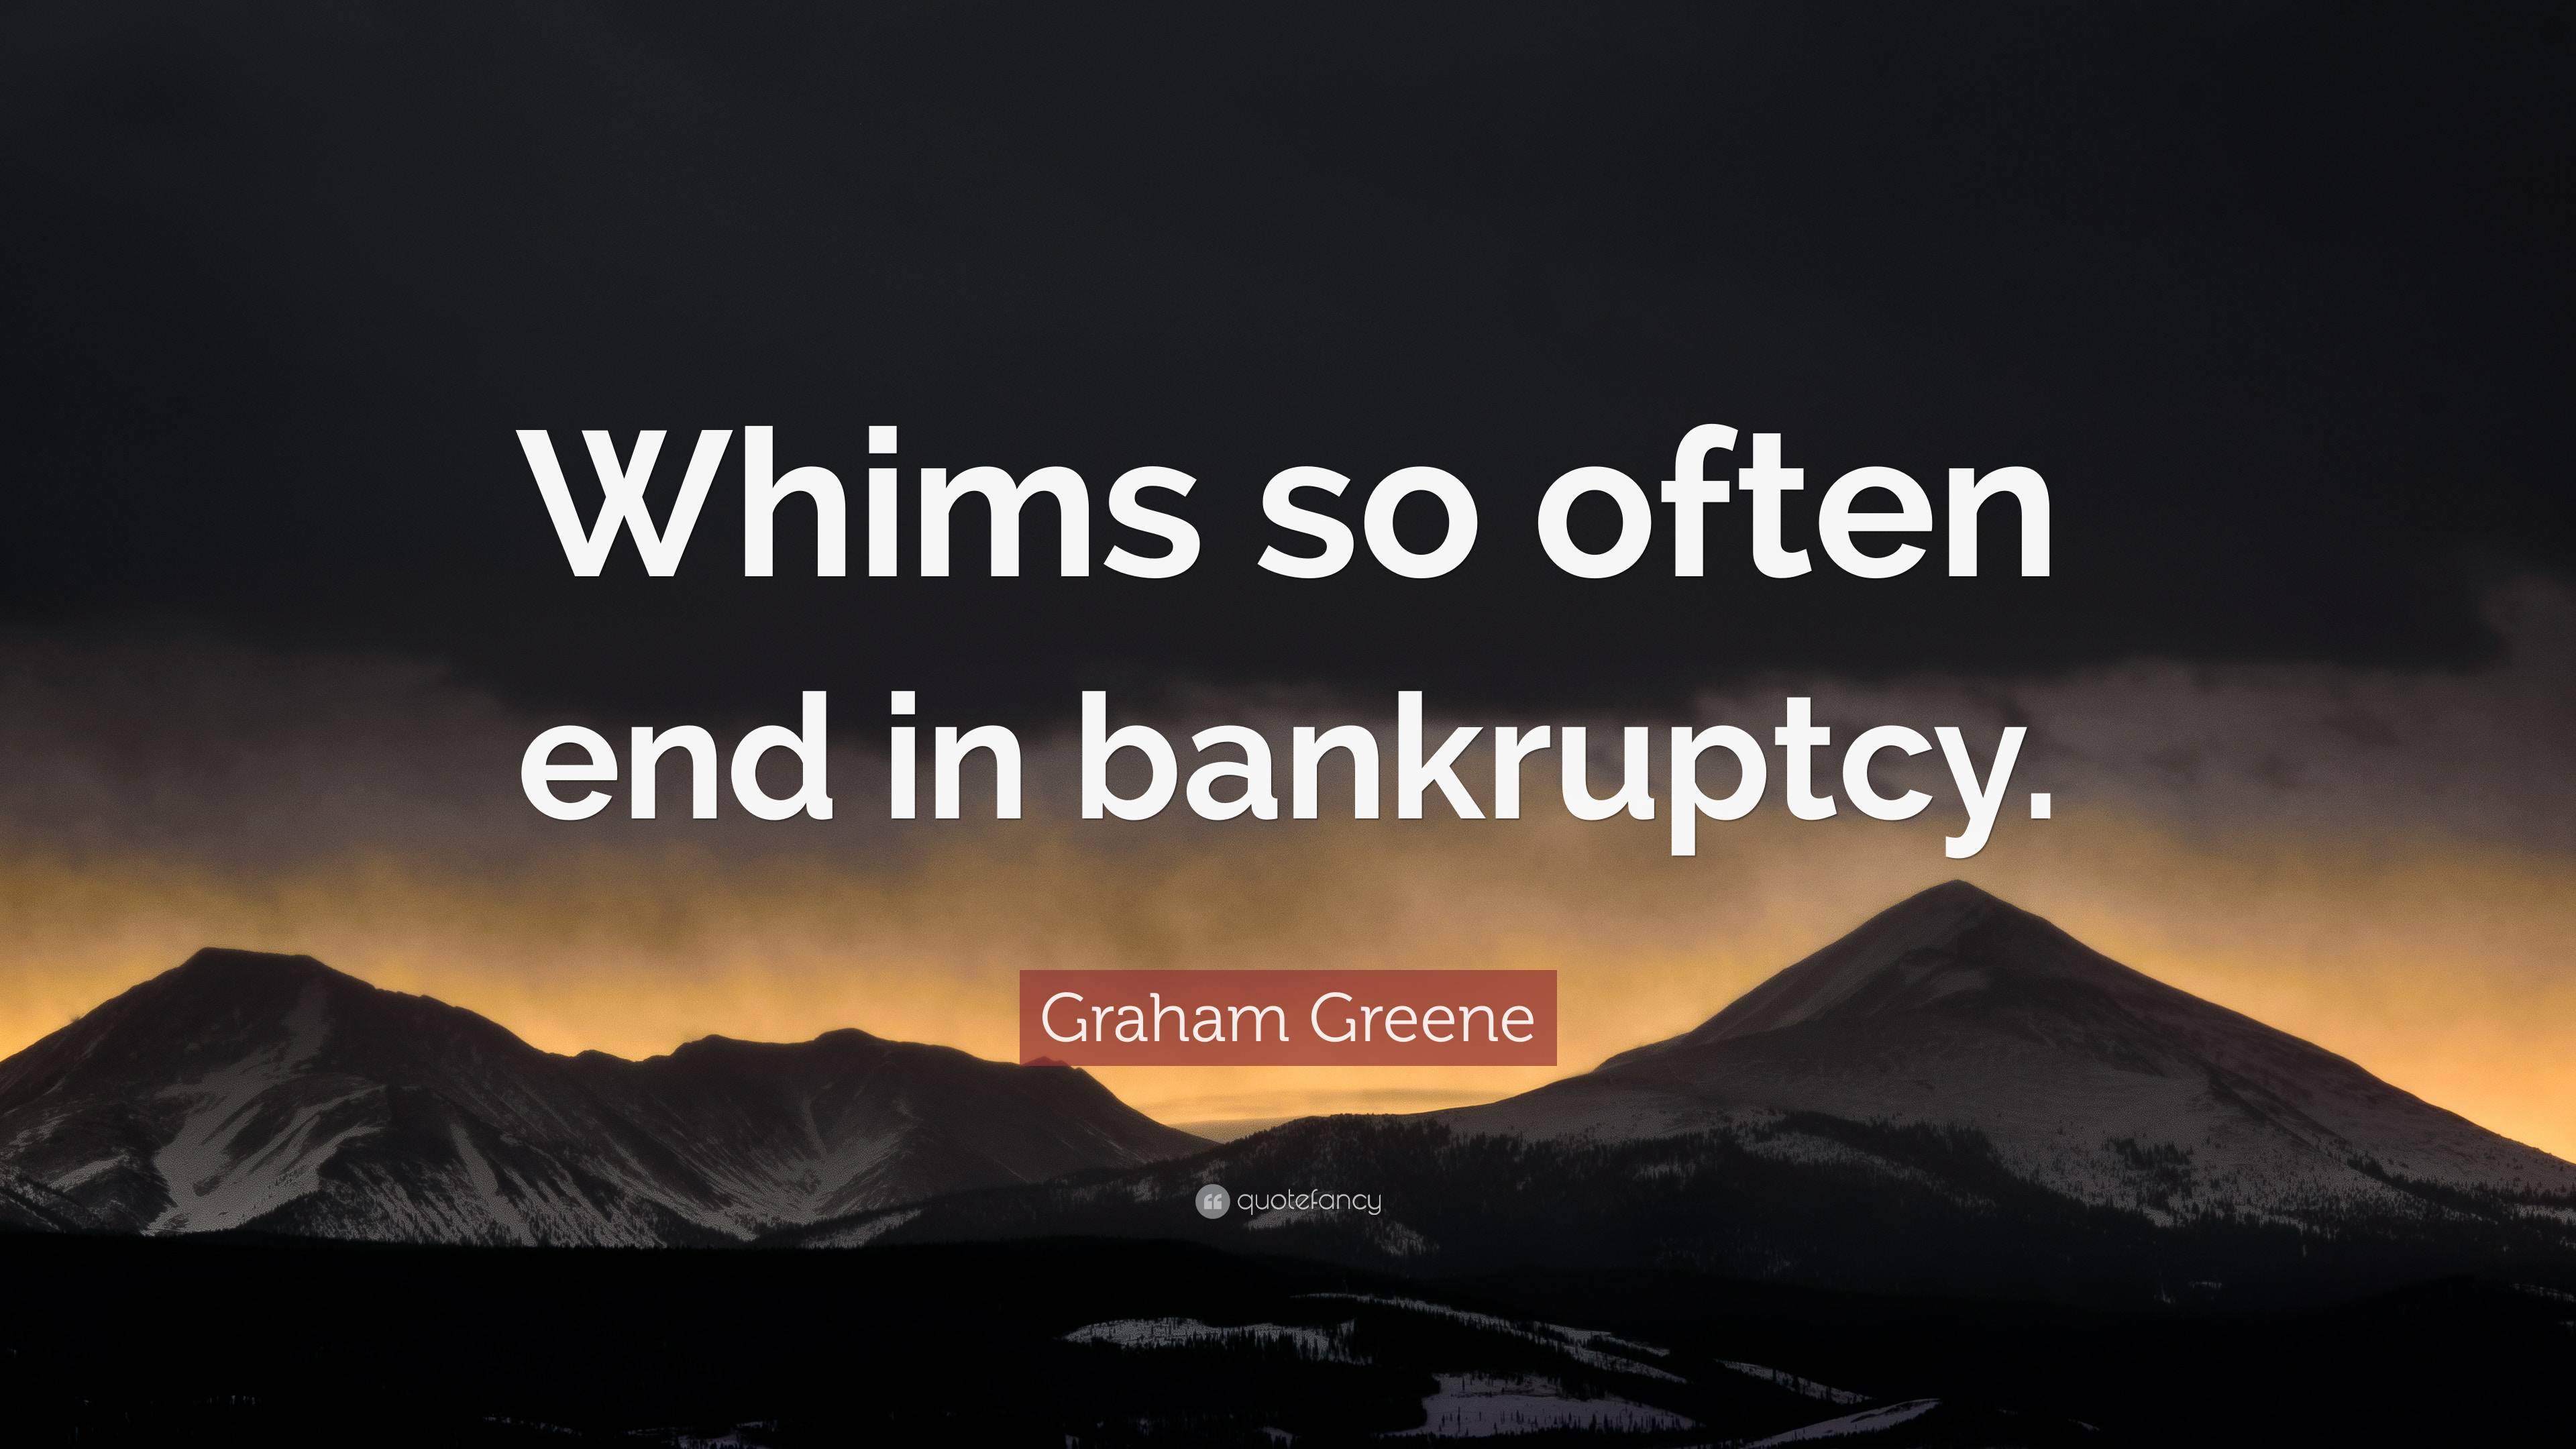 Graham Greene Quote: “Whims so often end in bankruptcy.”